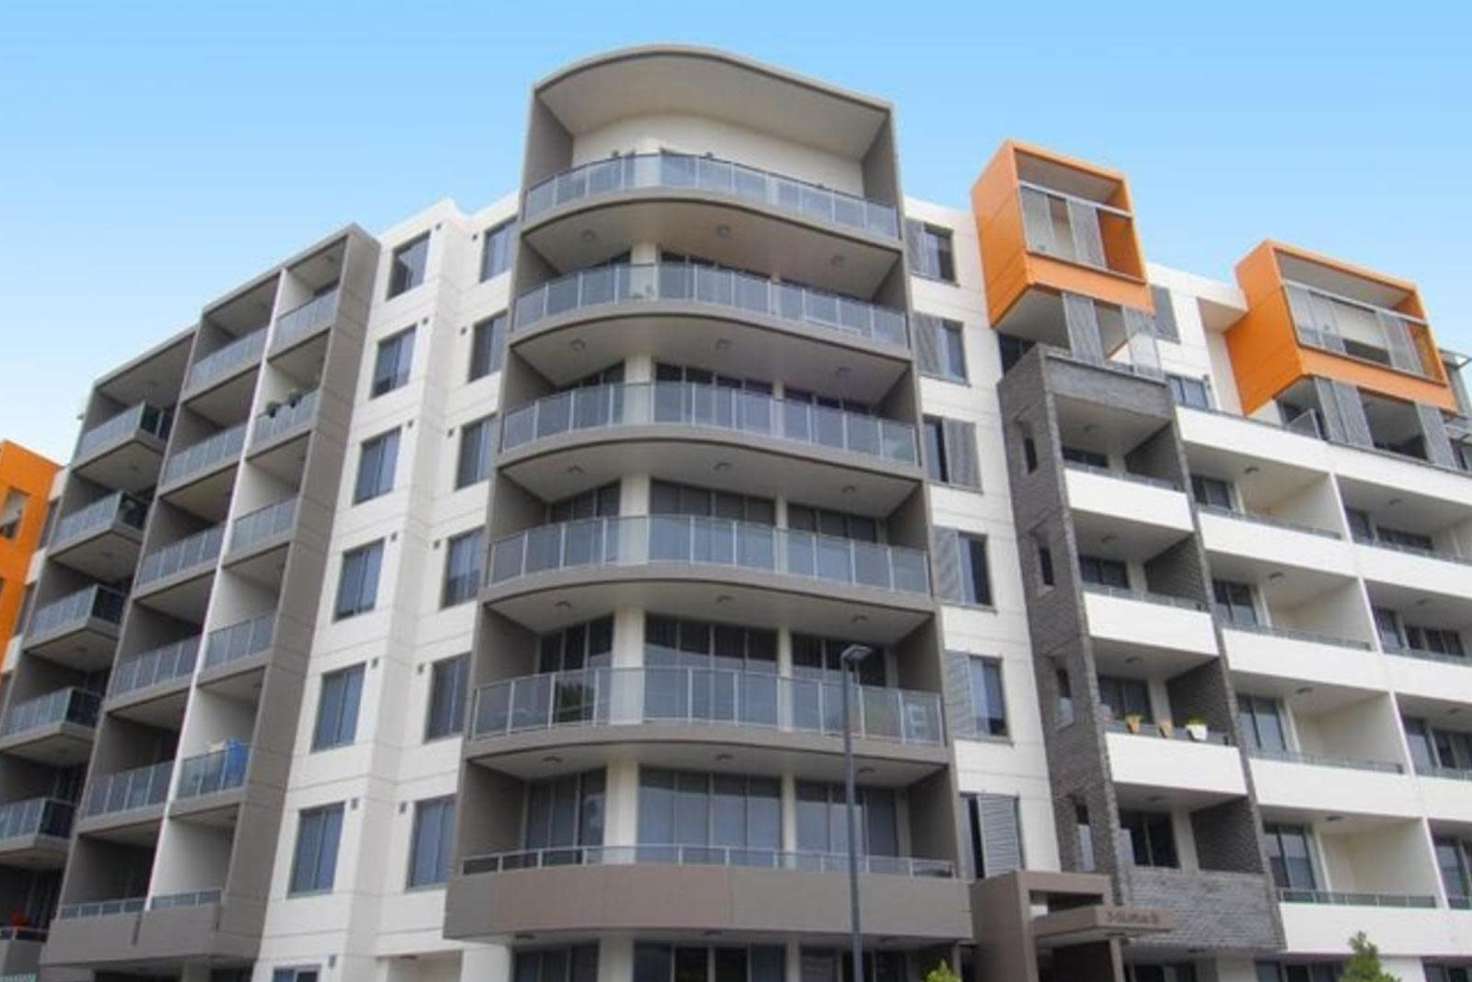 Main view of Homely apartment listing, 434/3 Loftus Street, Arncliffe NSW 2205